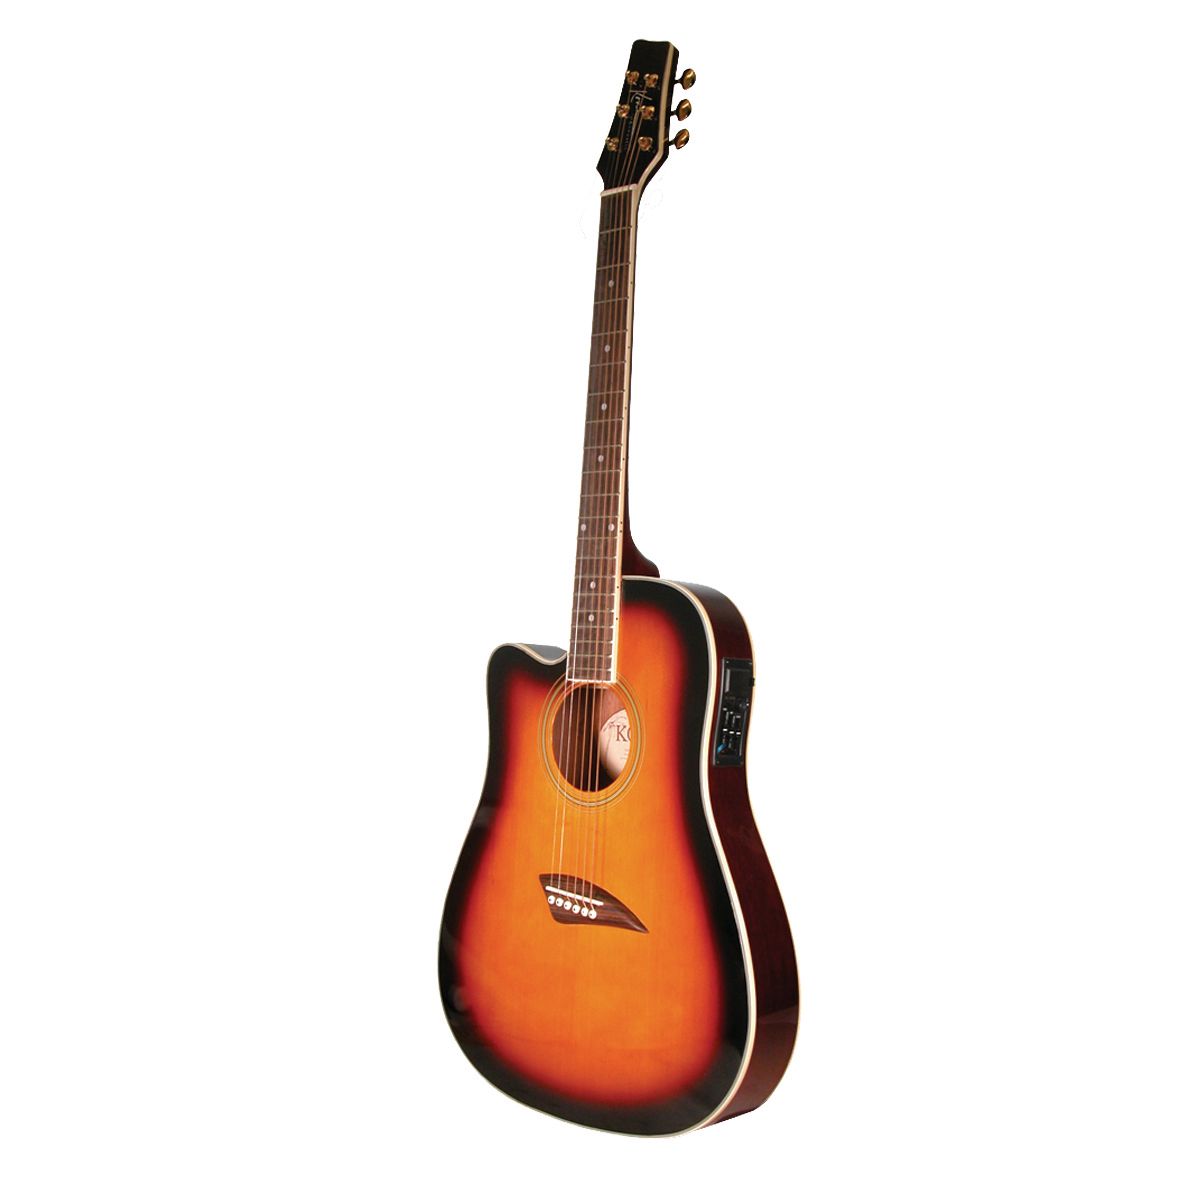 Kona Left-Handed Thin Body Acoustic/Electric Guitar with High-Gloss Tobacco Sunburst Finish